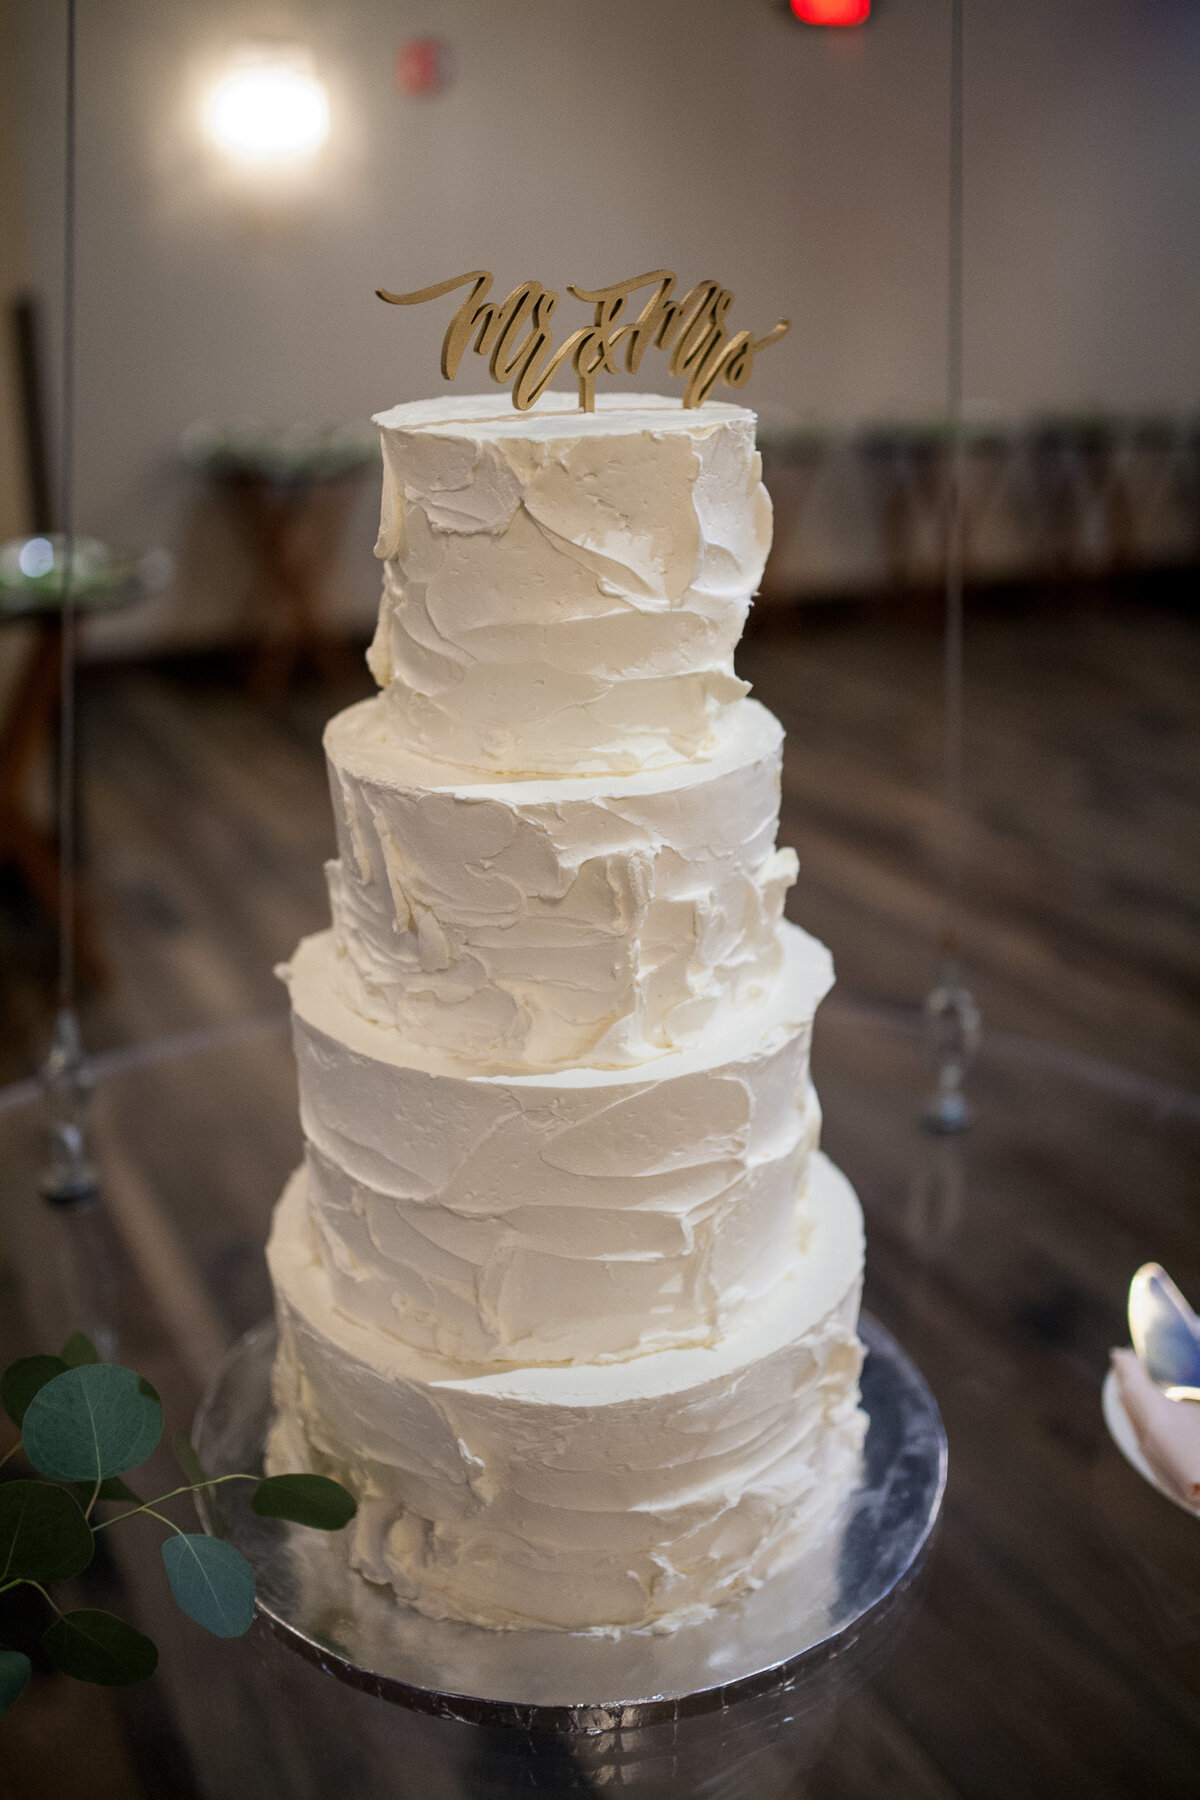 Four tier cake with “Mr & Mrs” wooden cake topper, at the Caramel Room in St. Louis.